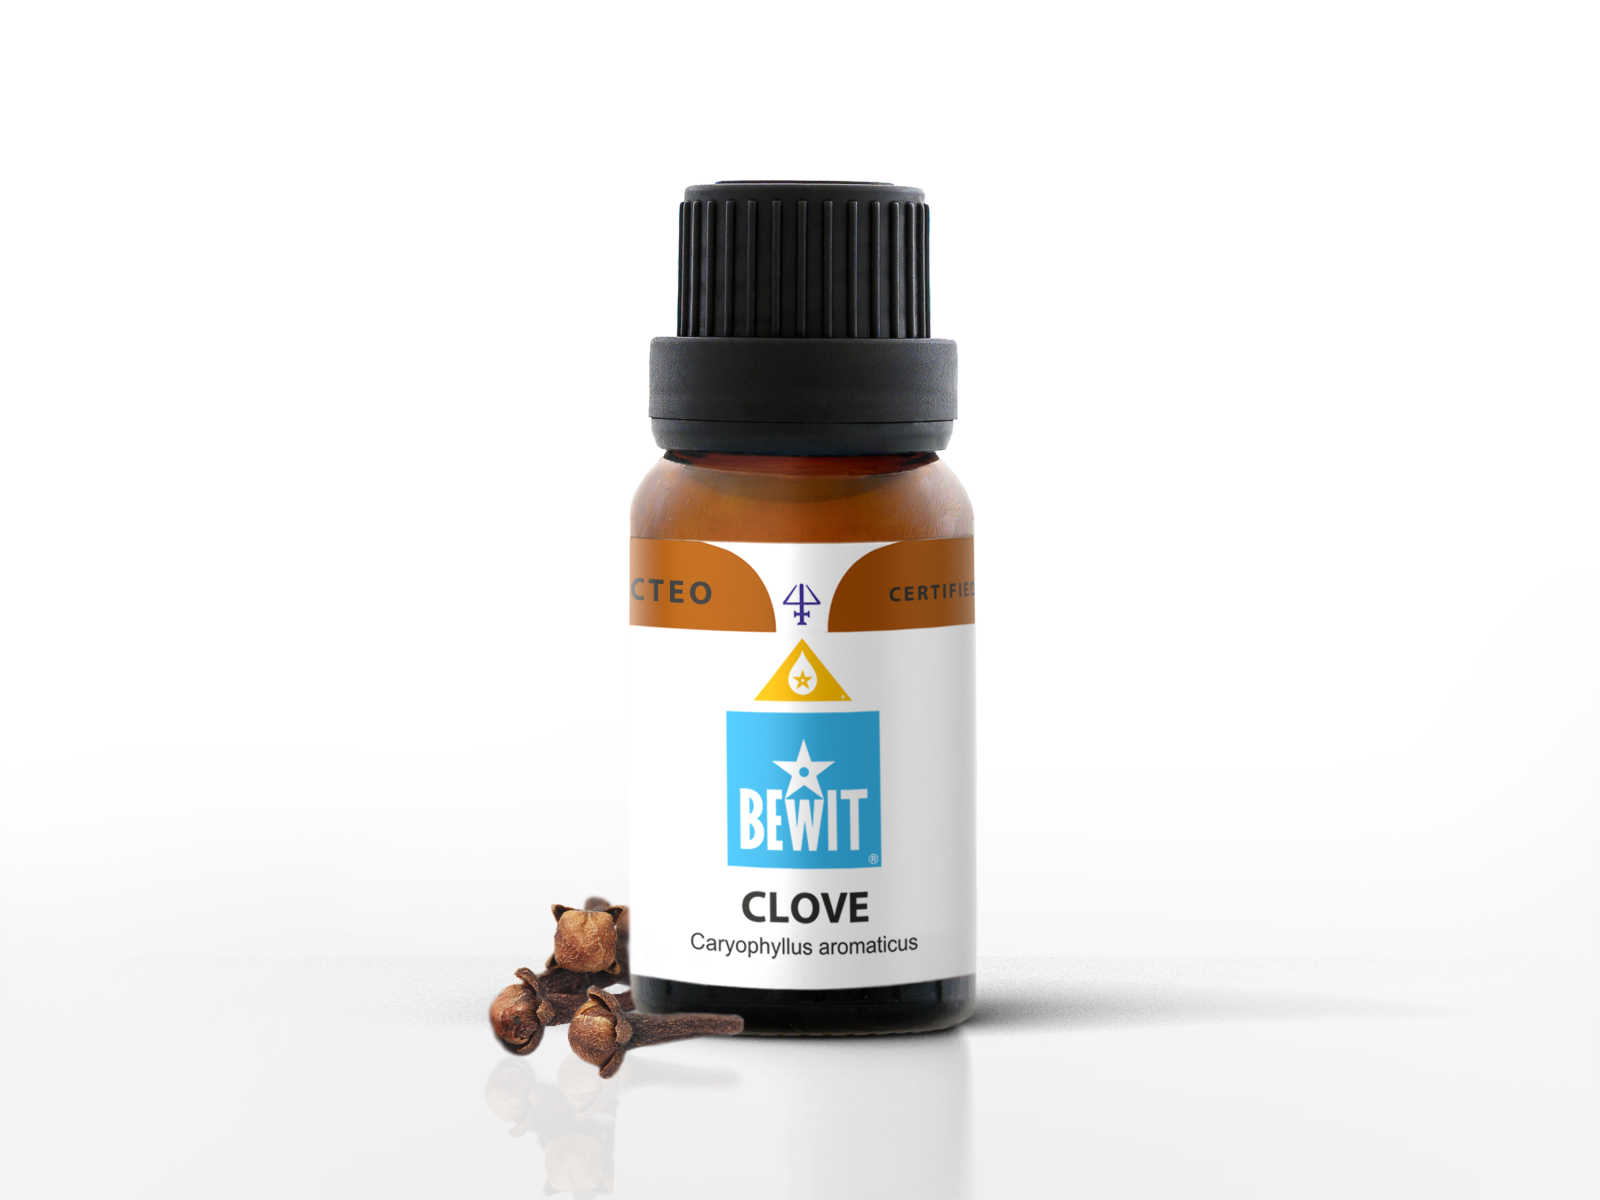 BEWIT Clove - 100% pure and natural CTEO® essential oil